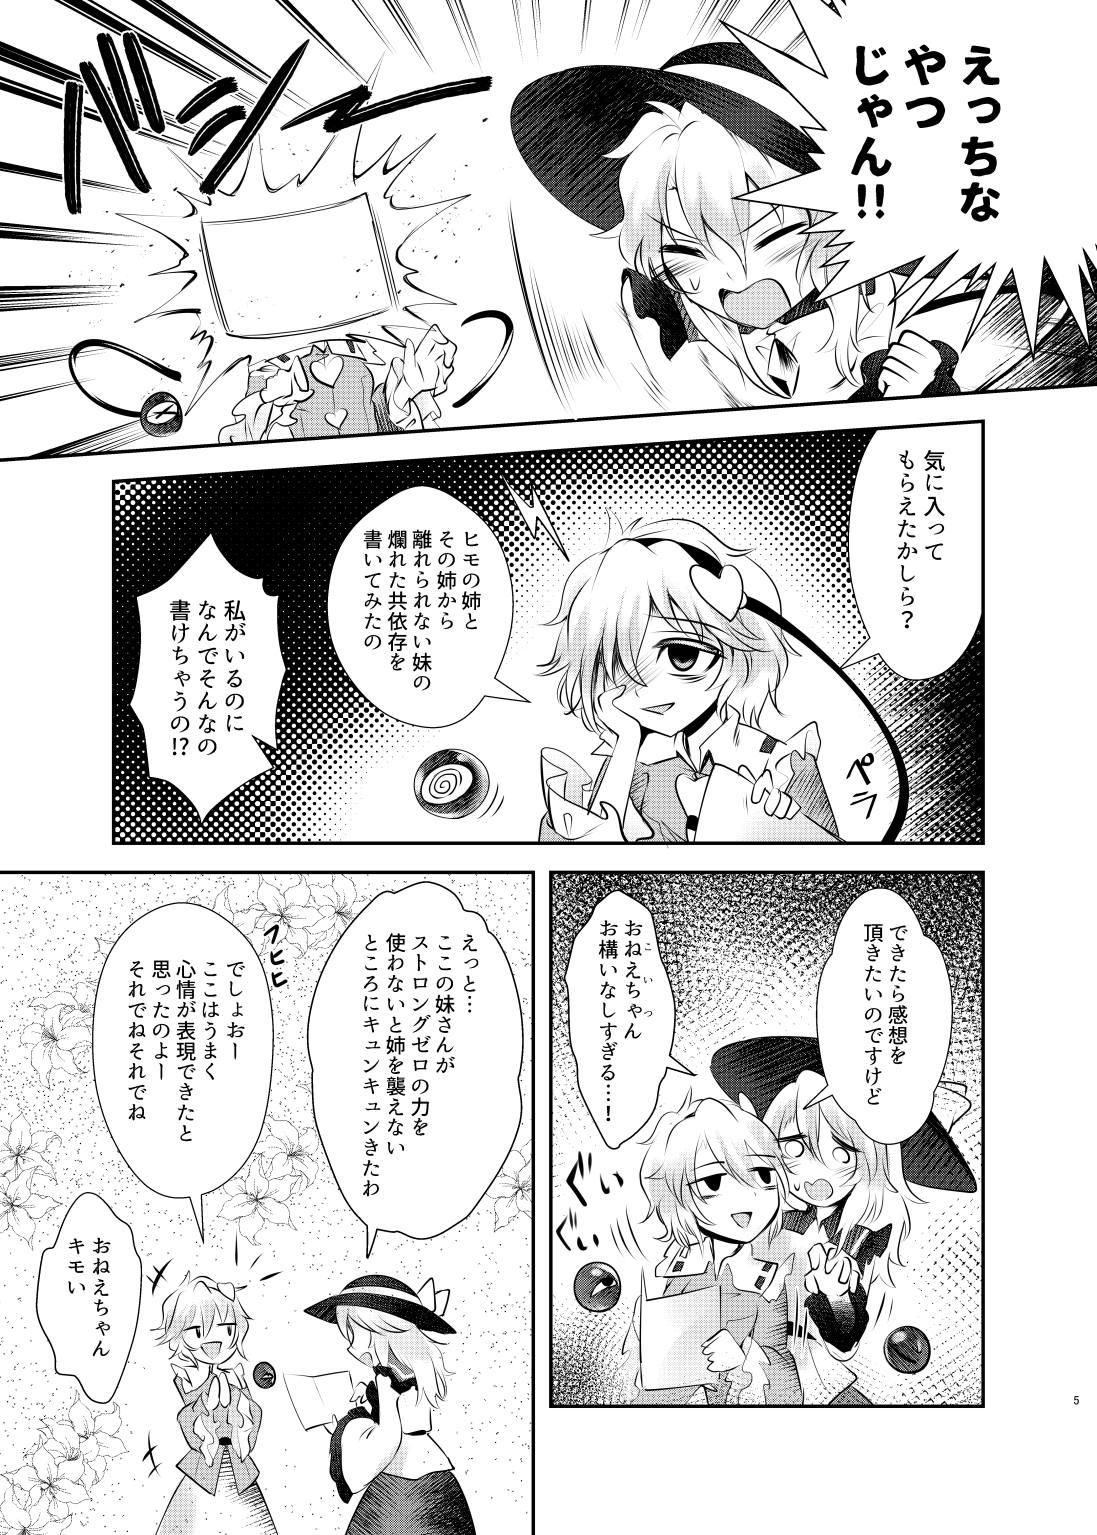 Funk Chitei no Be The One - Touhou project Pendeja - Page 4